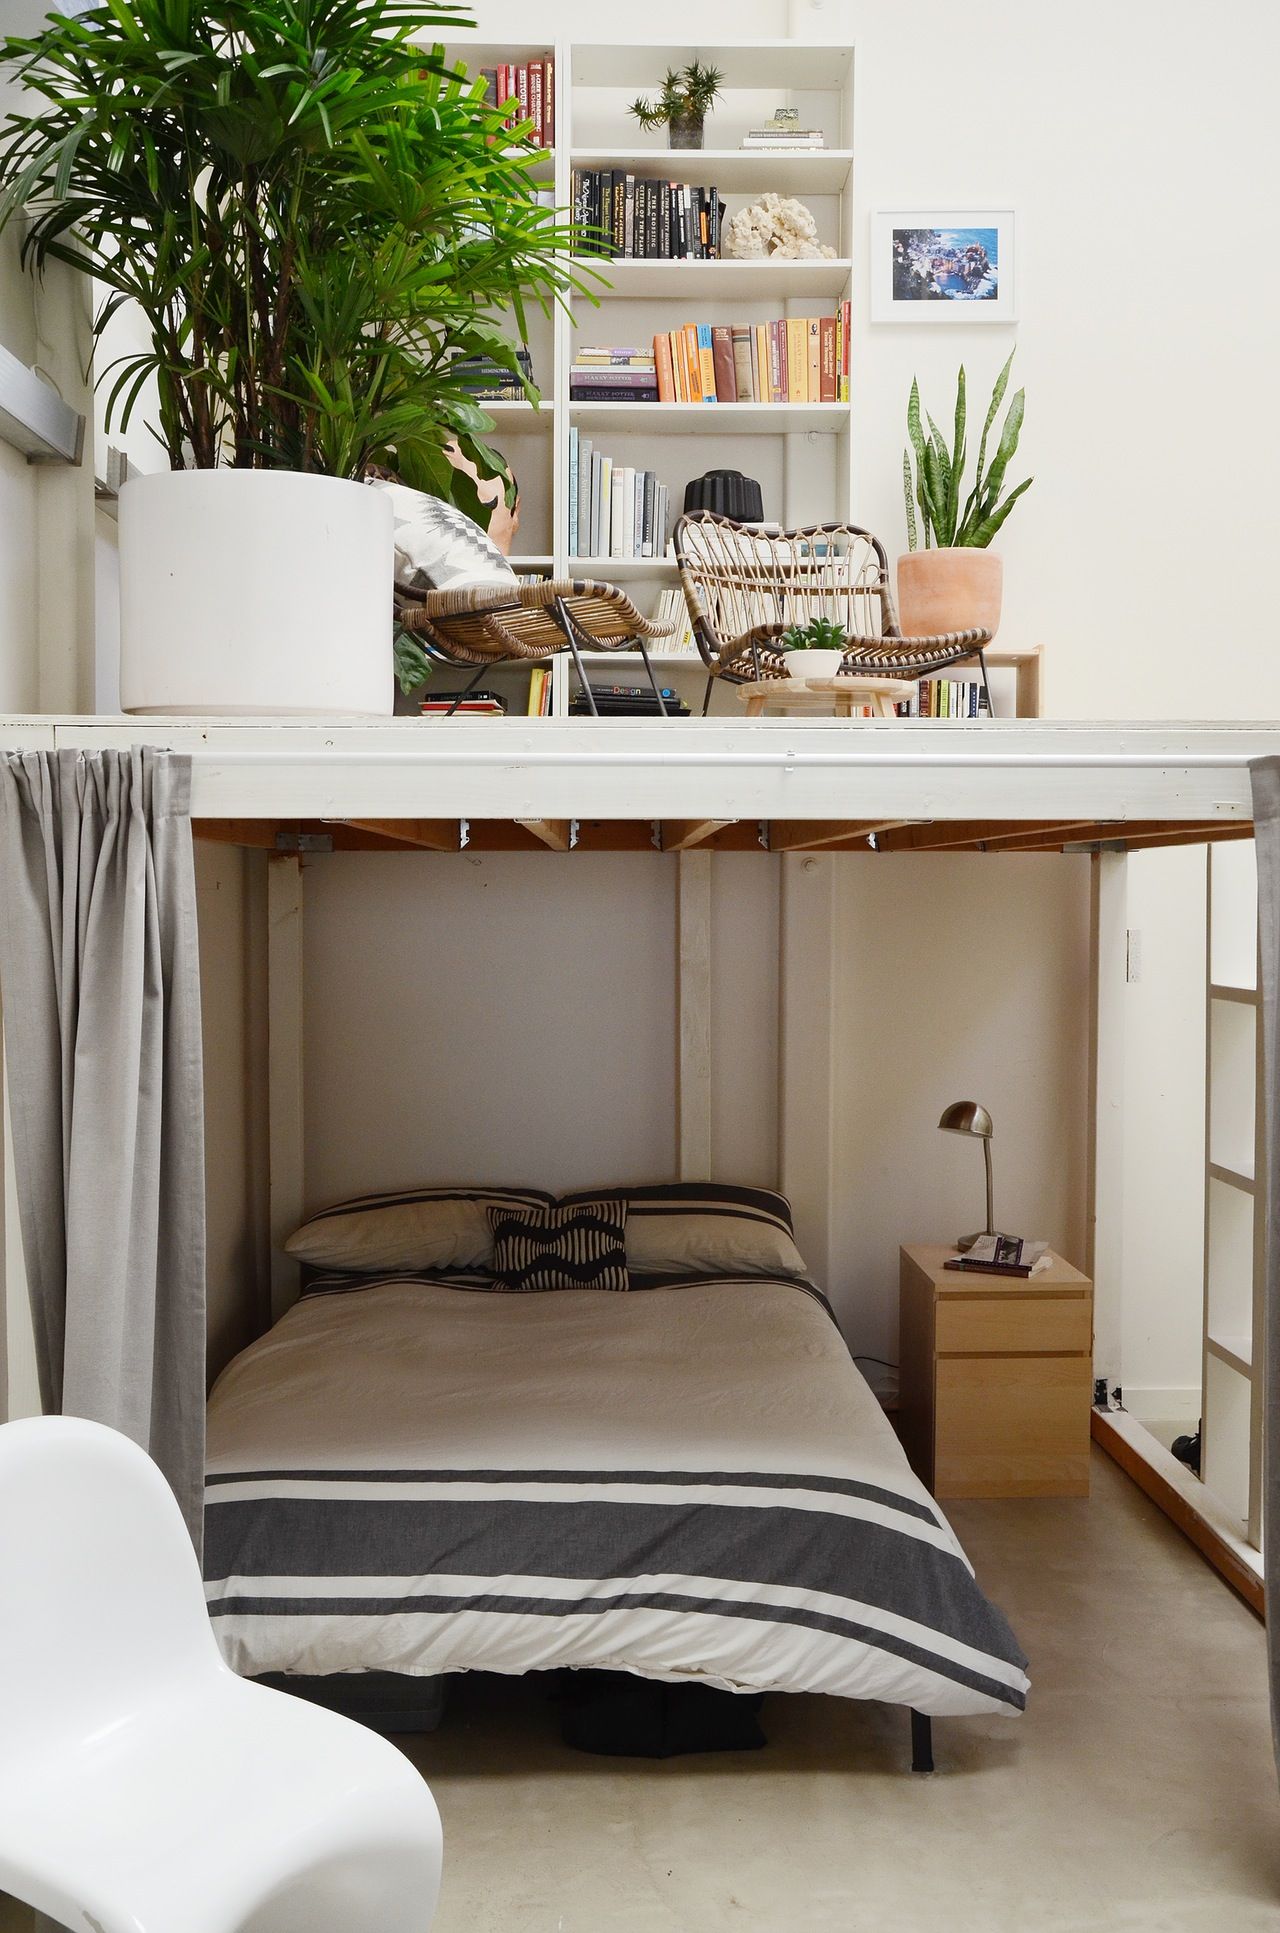 Space-Saving Comfort: Loft Bed Designs for Small Spaces